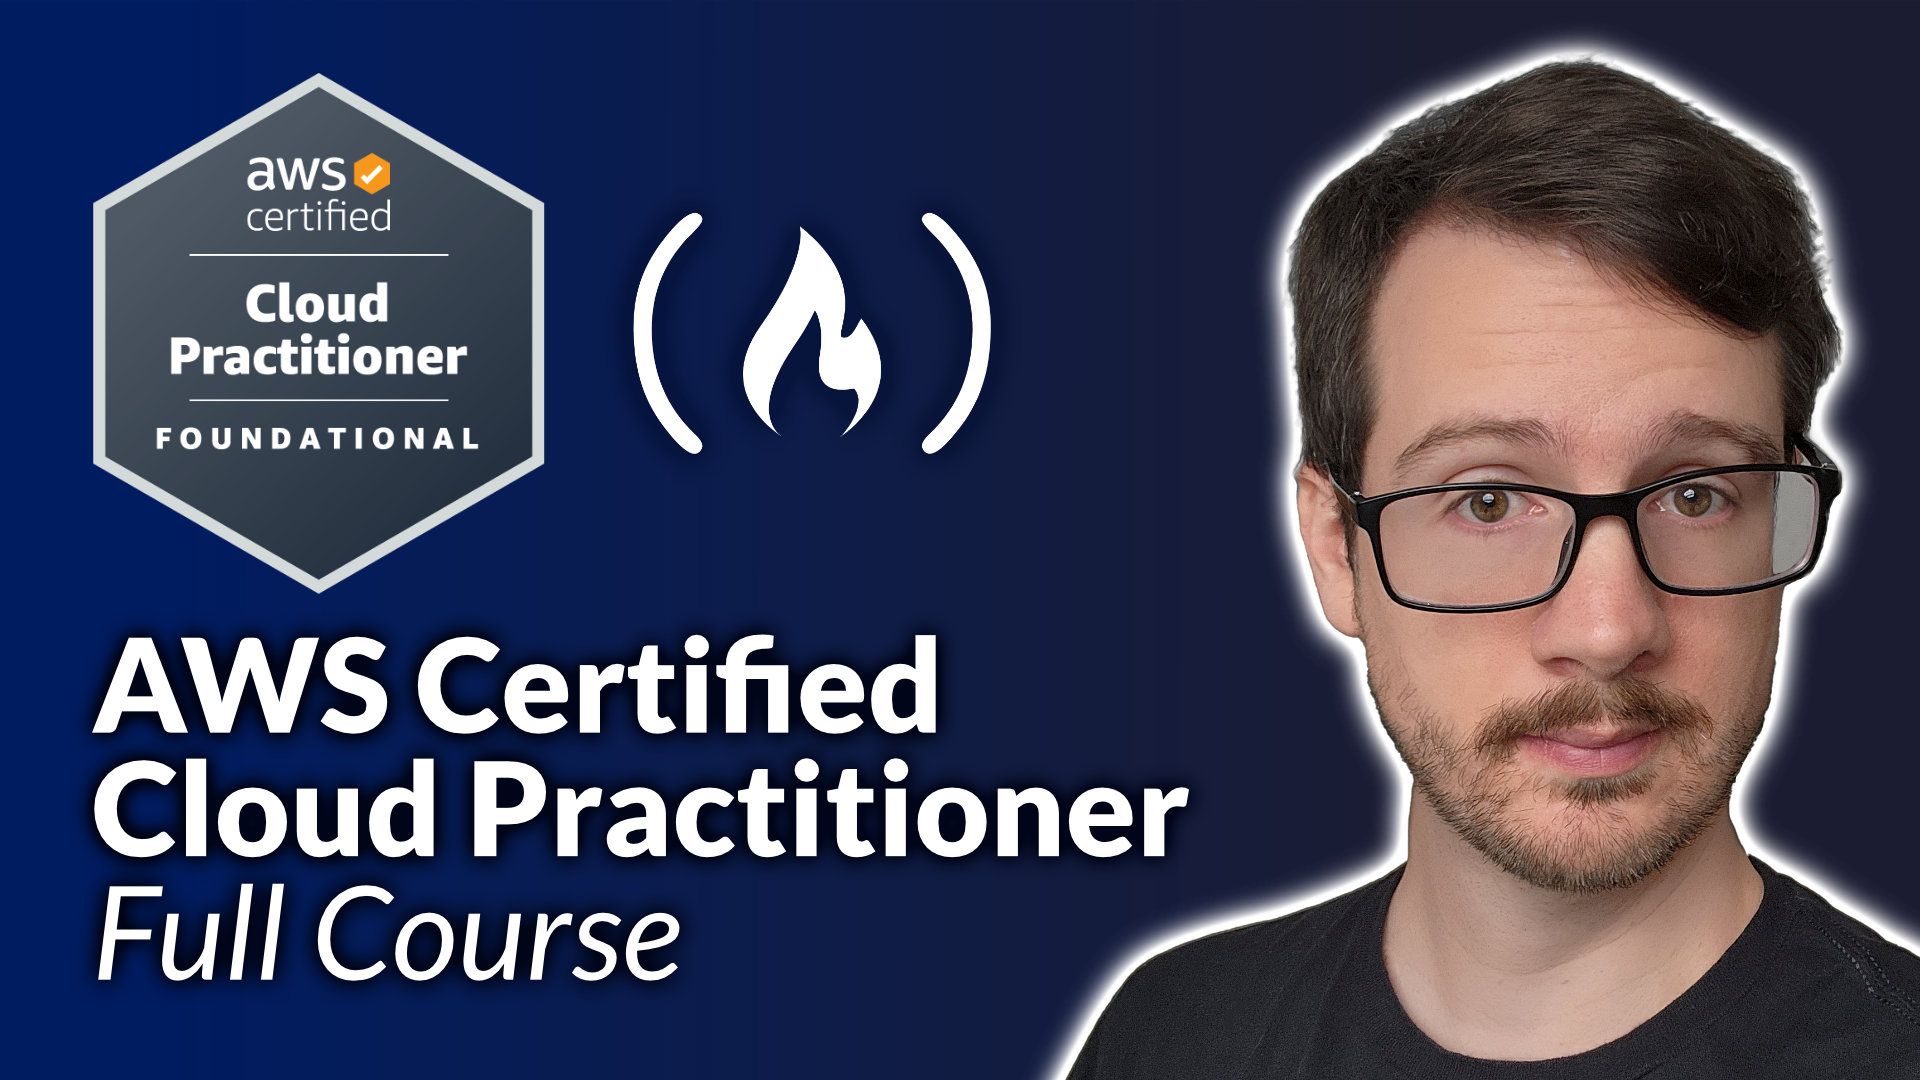 Image for AWS Certified Cloud Practitioner Study Course – Pass the Exam With This Free 14-Hour Course